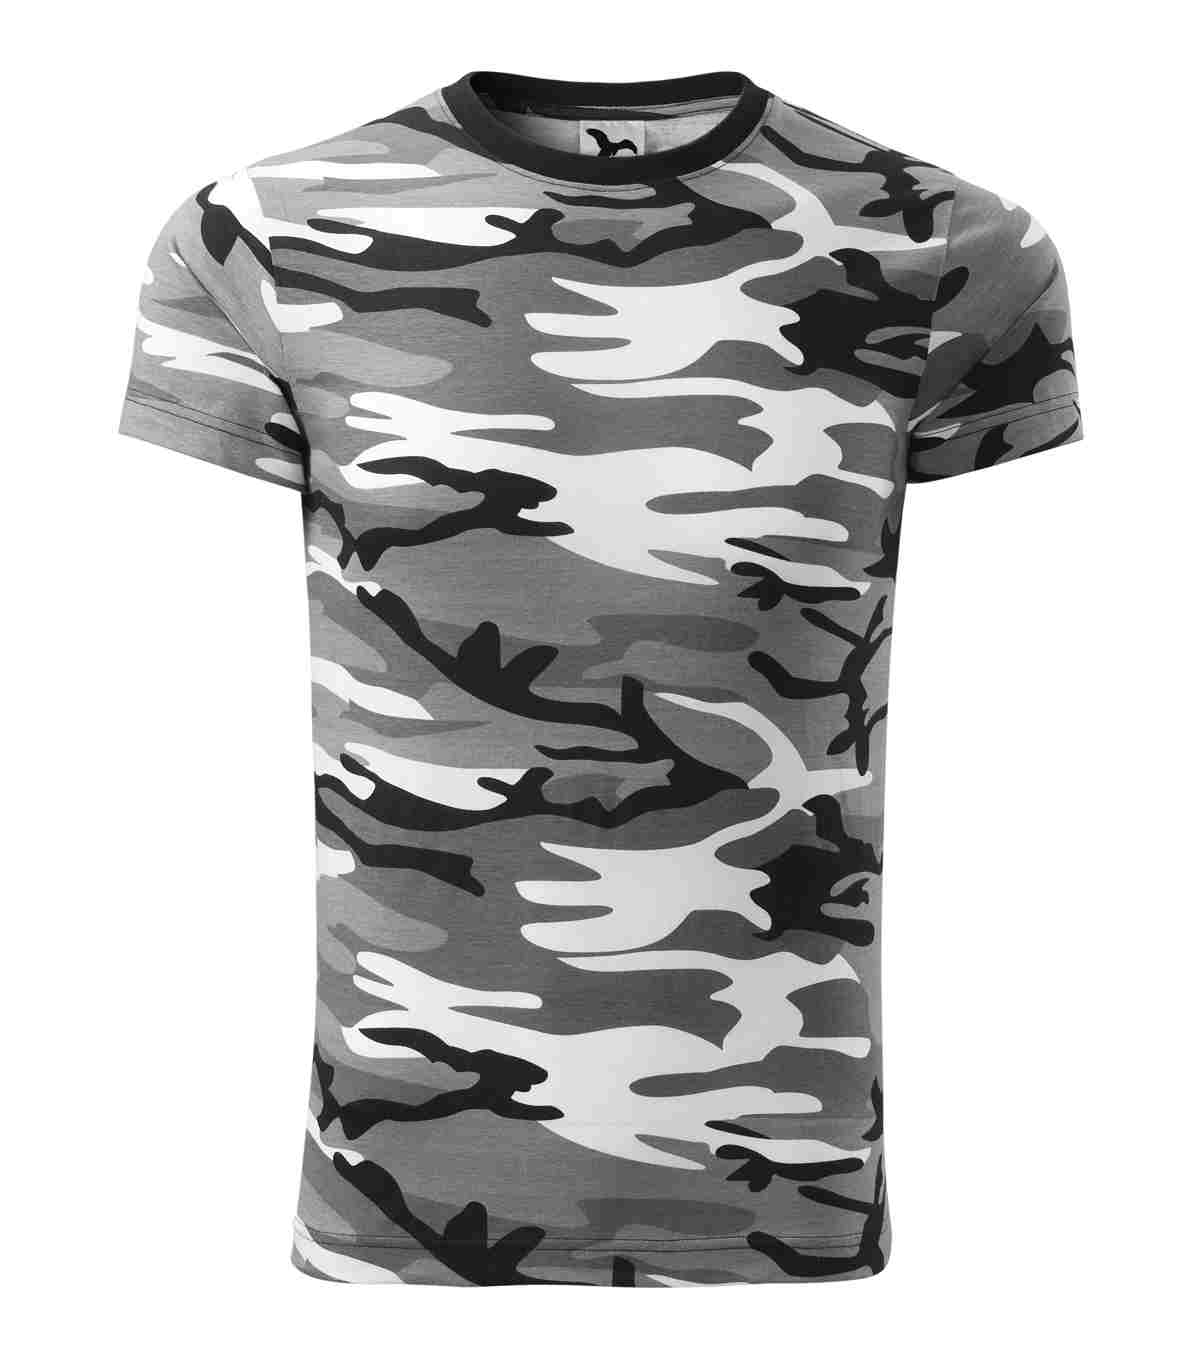 Camouflage T-shirt grey | Camouflage Army Military